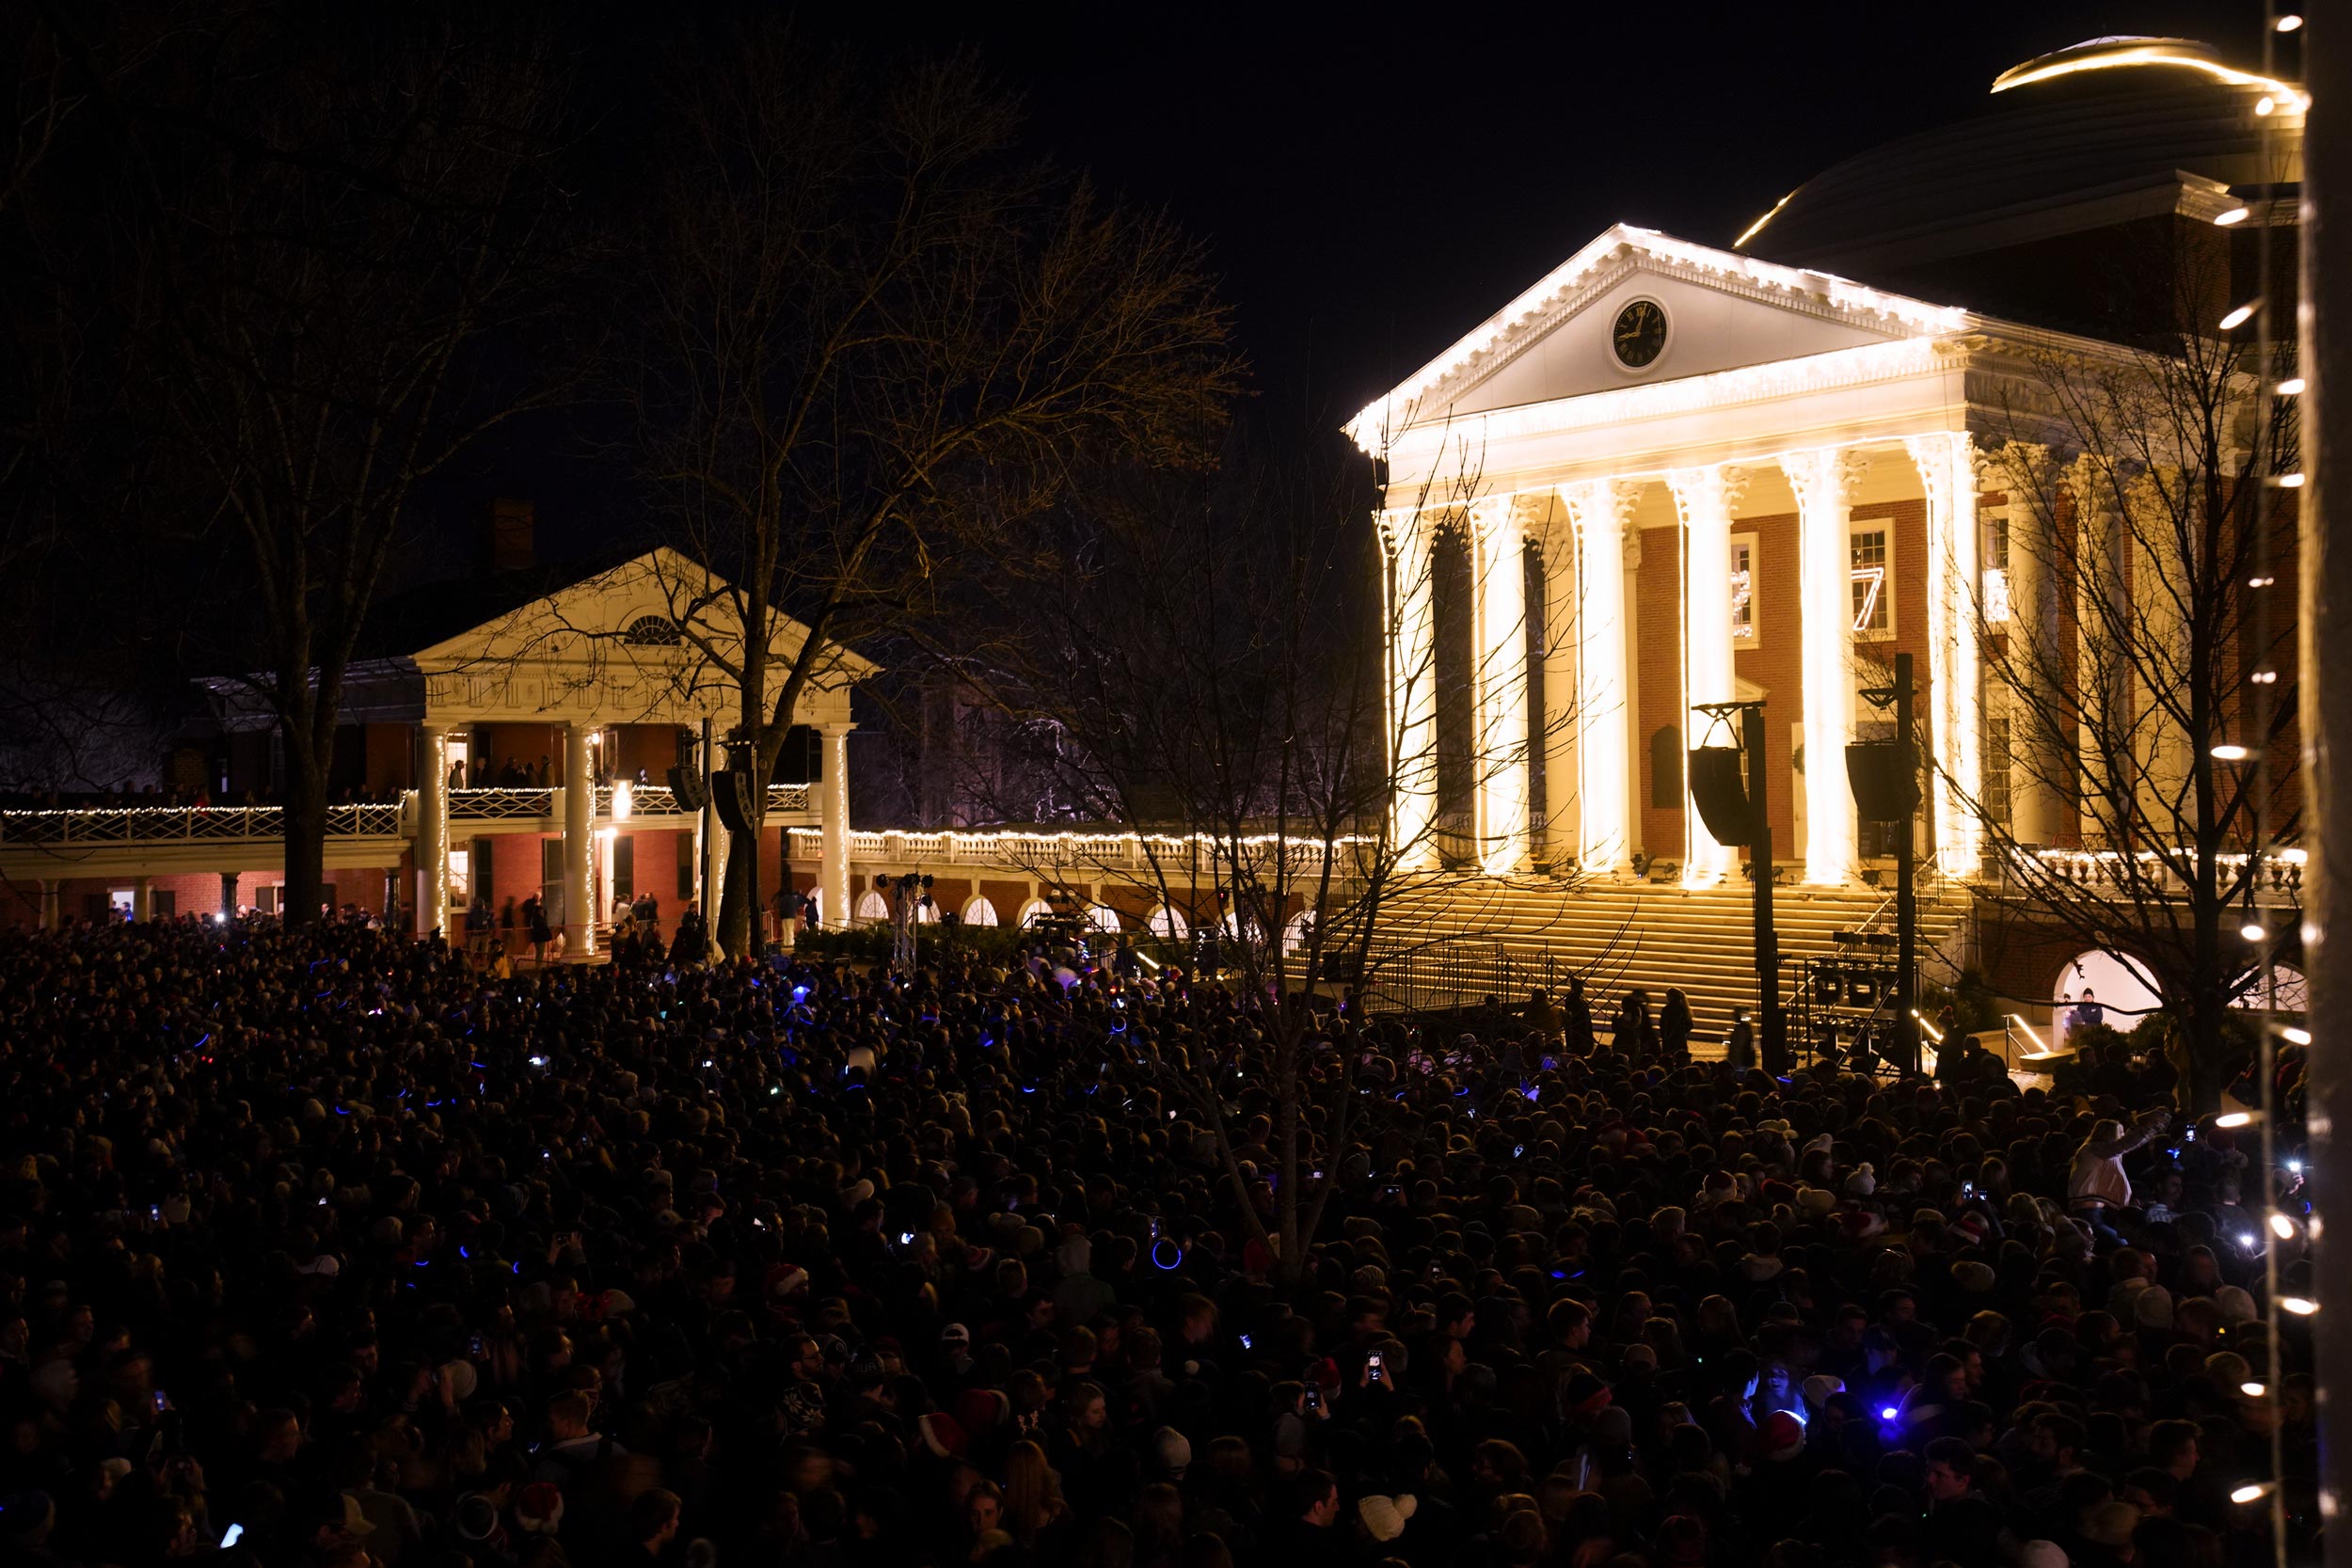 View of the lawn filled with people lit up in multiple colors